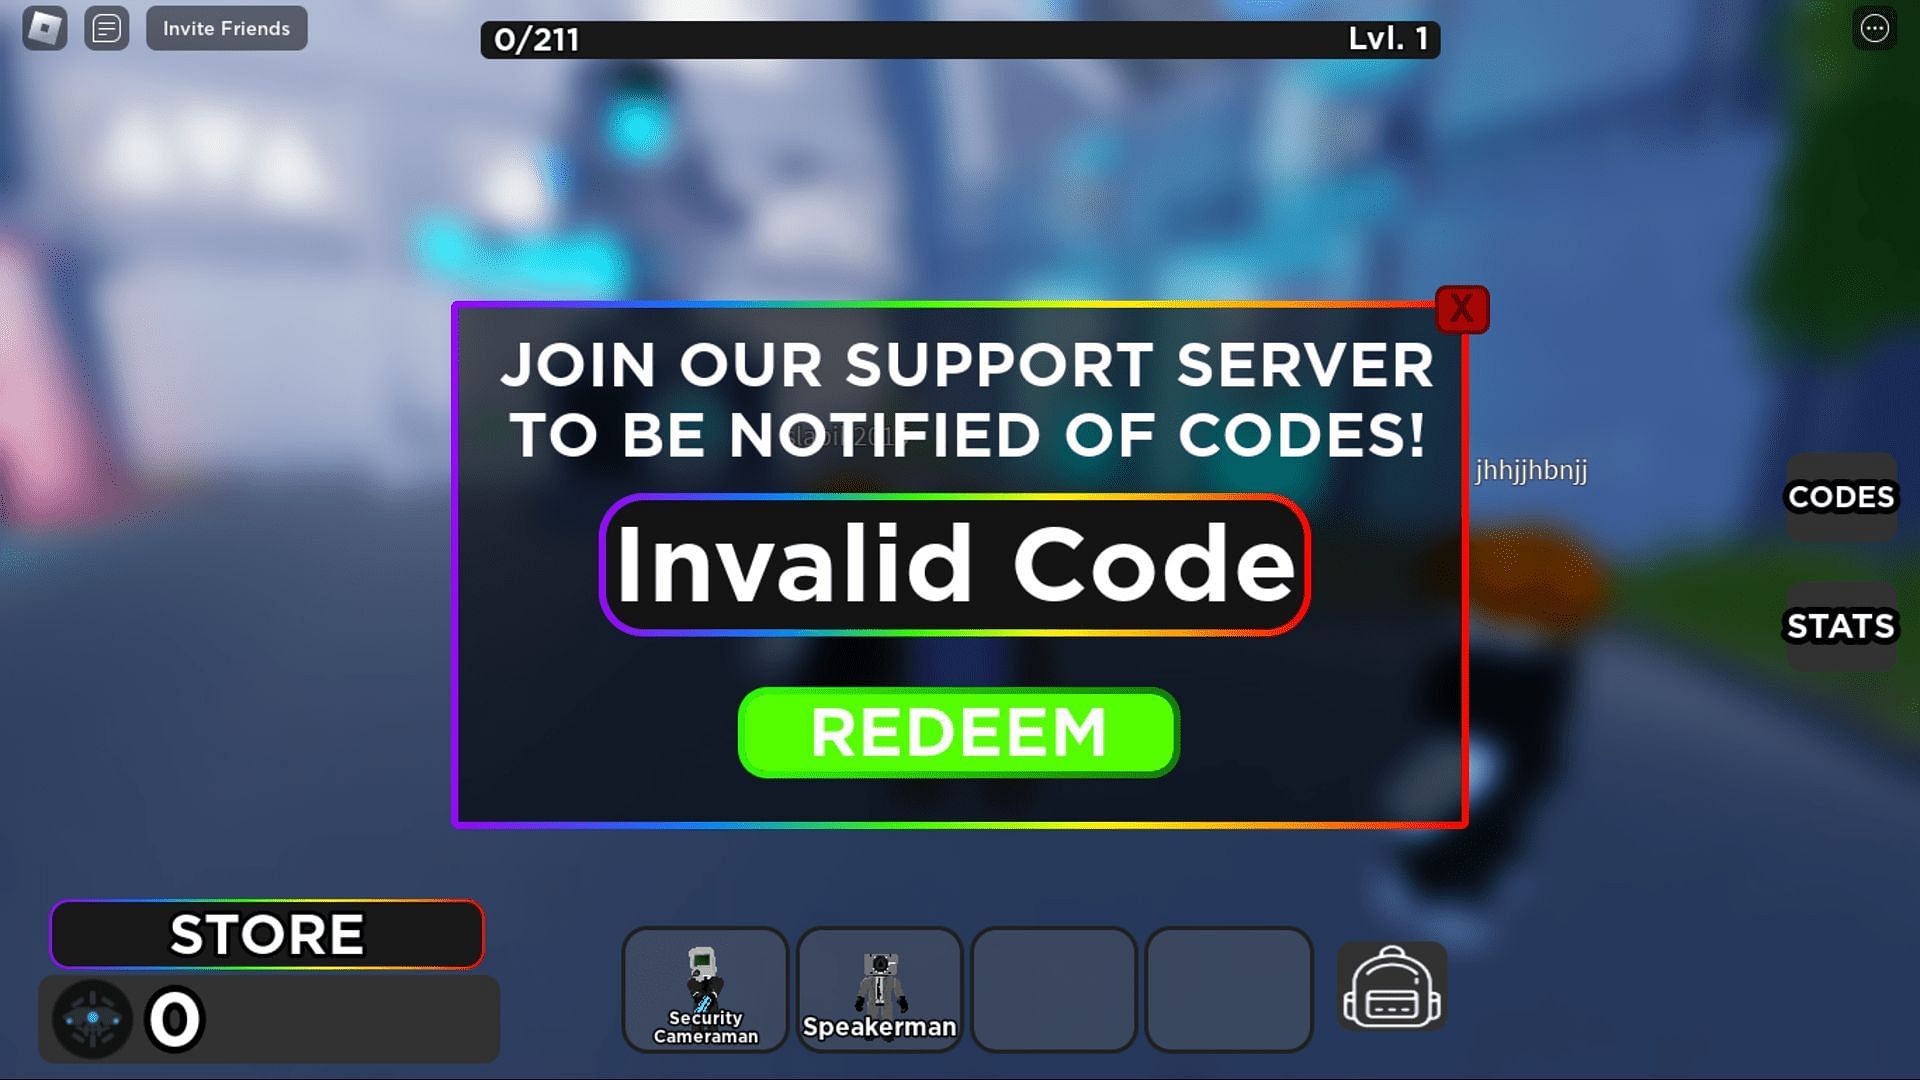 Troubleshoot codes in Bathroom Tower Defense with ease (Image via Roblox)